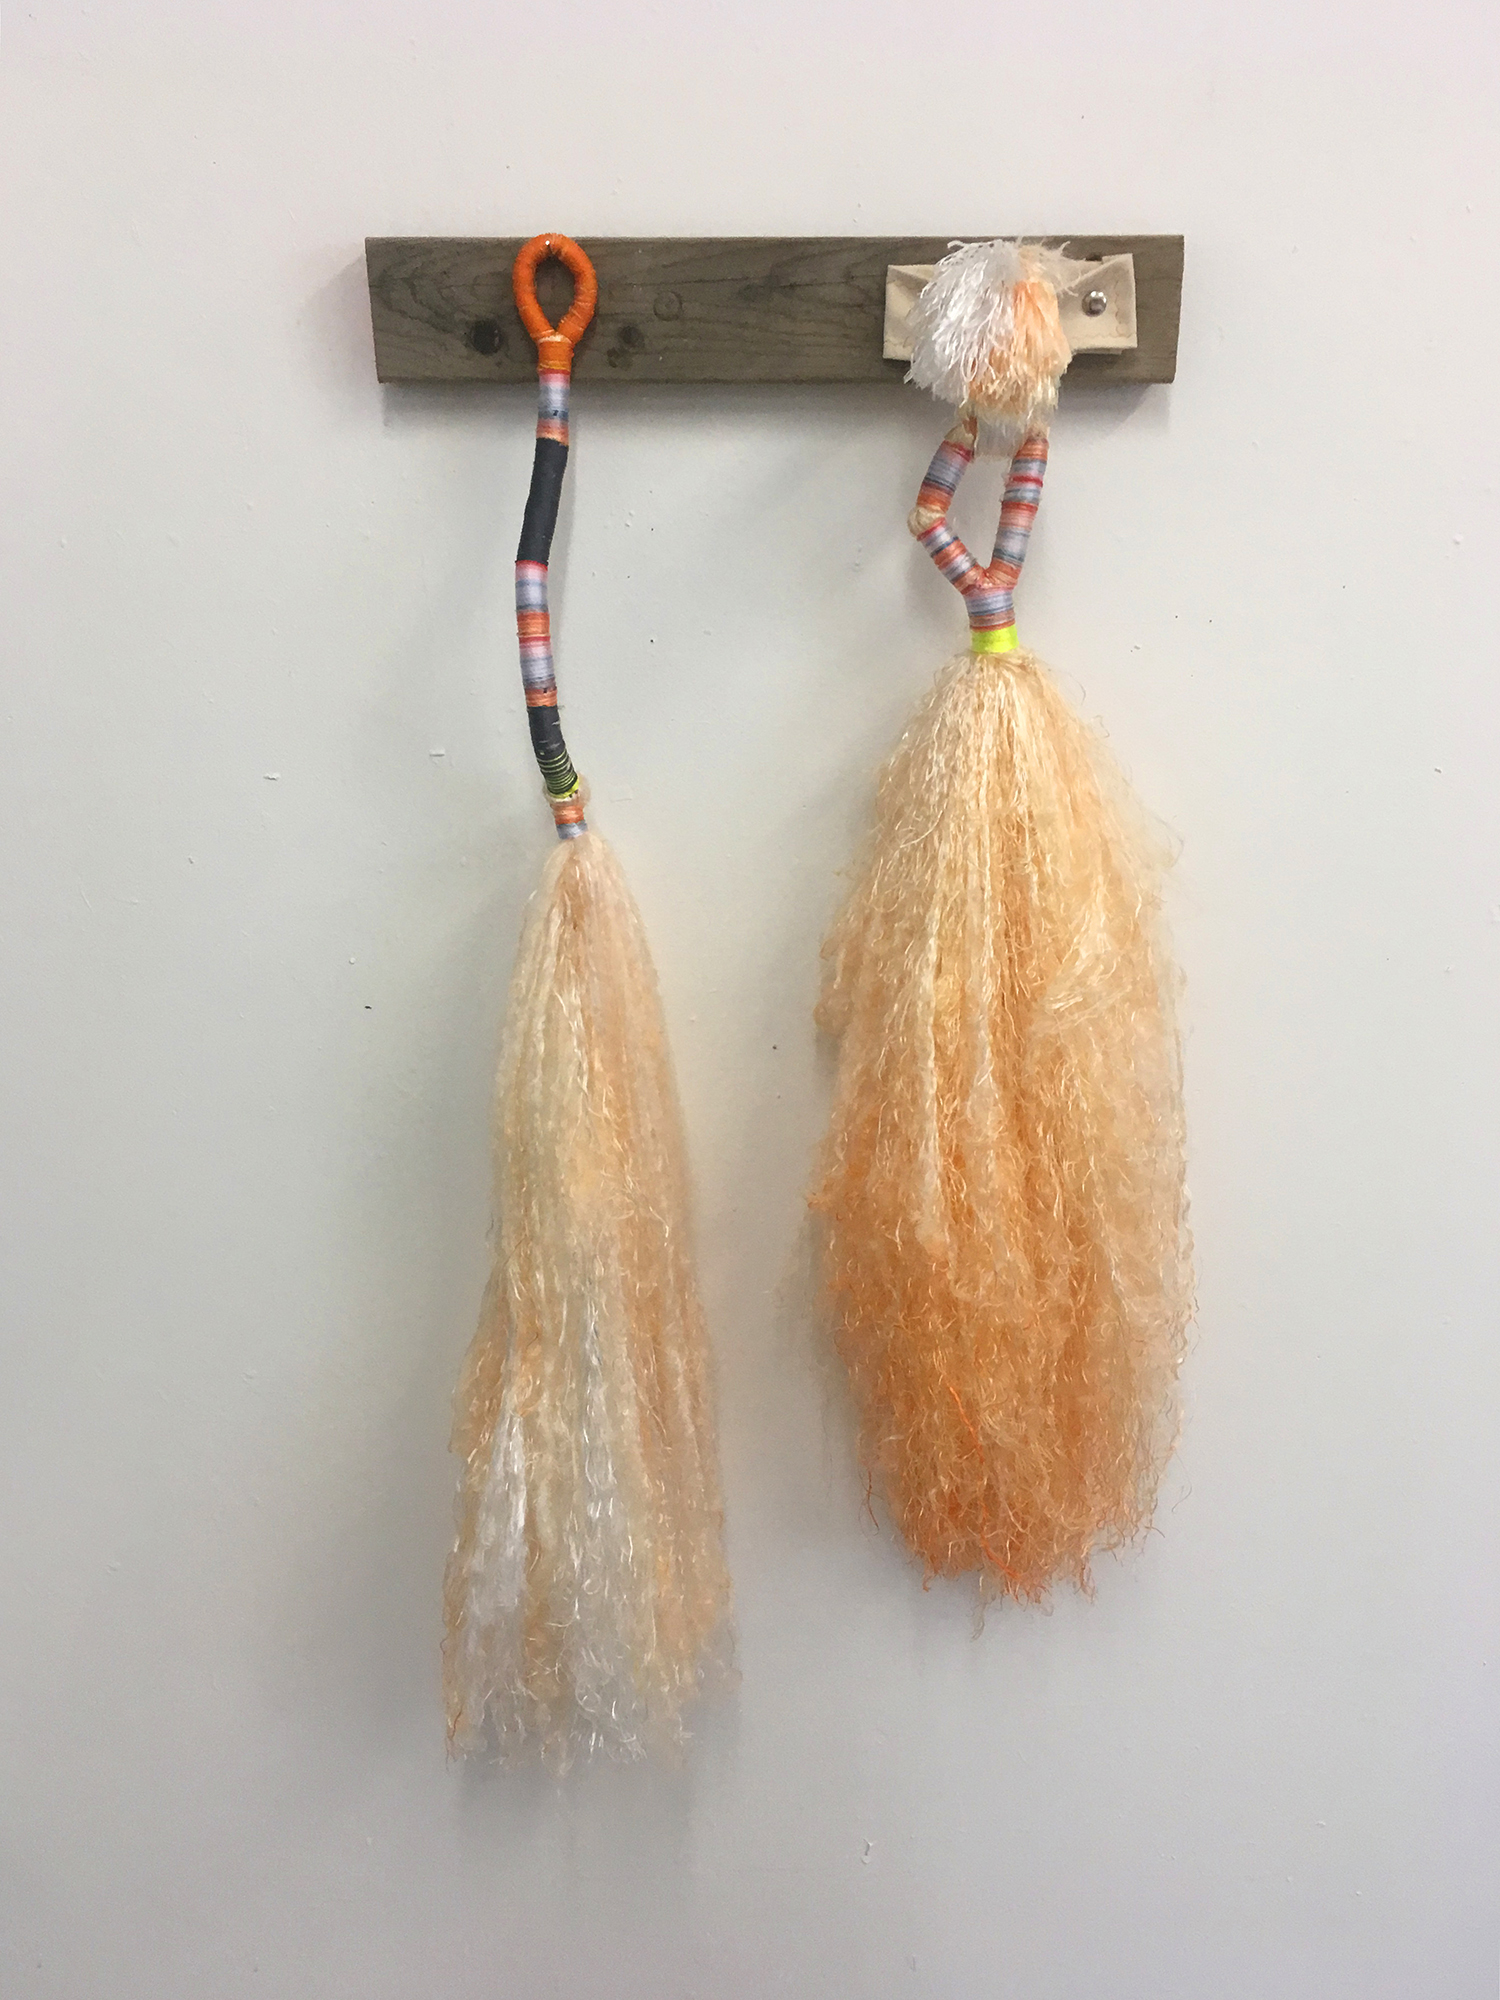  Daniel Zeese,  Two Orange Brooms,  bound dyed nylon and canvas fixture, 36x24x6 